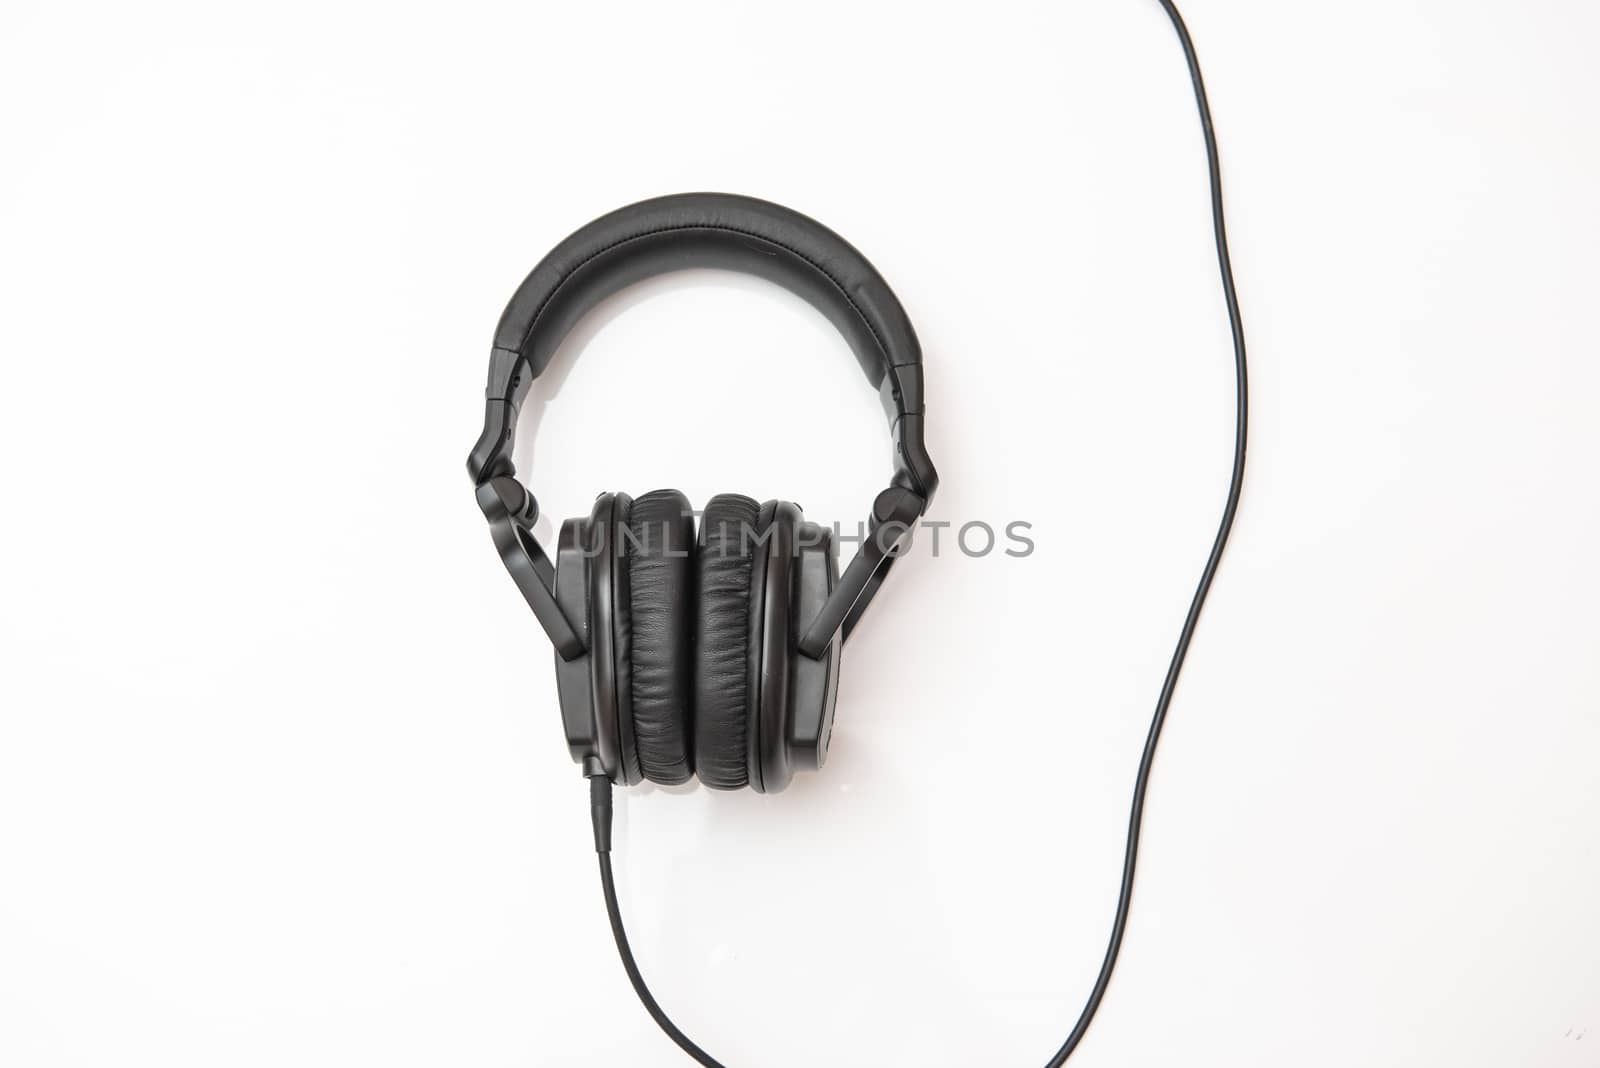 headphones on an isolated white background